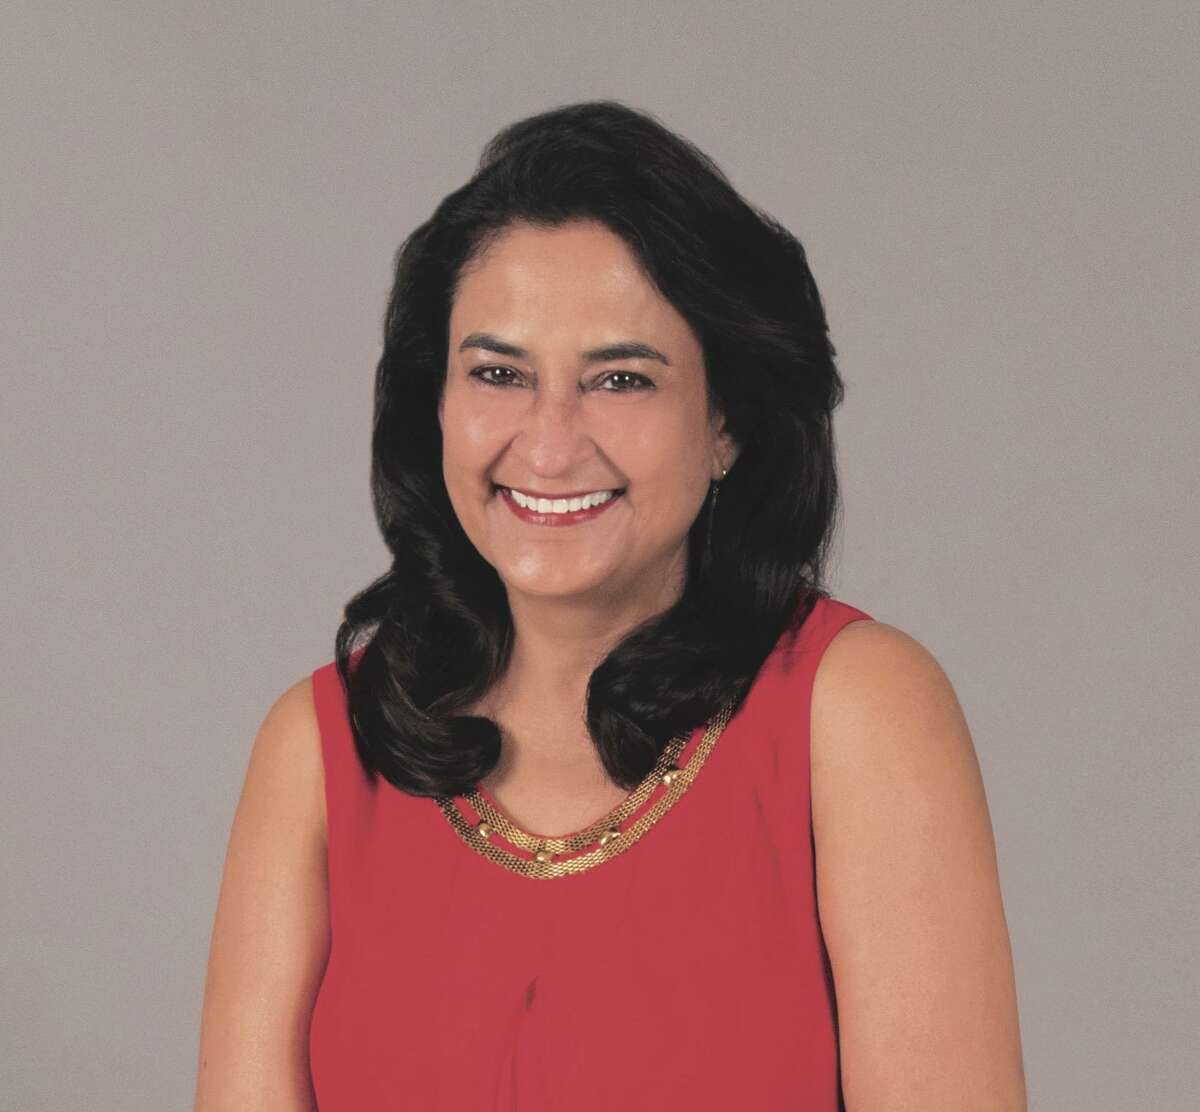 Rashmi Gupta, a 22-year resident of The Woodlands, finished second in the Position 5 race for the township's Board of Directors. Gupta, a local real estate agent, nabbed second place with 4,230 votes.